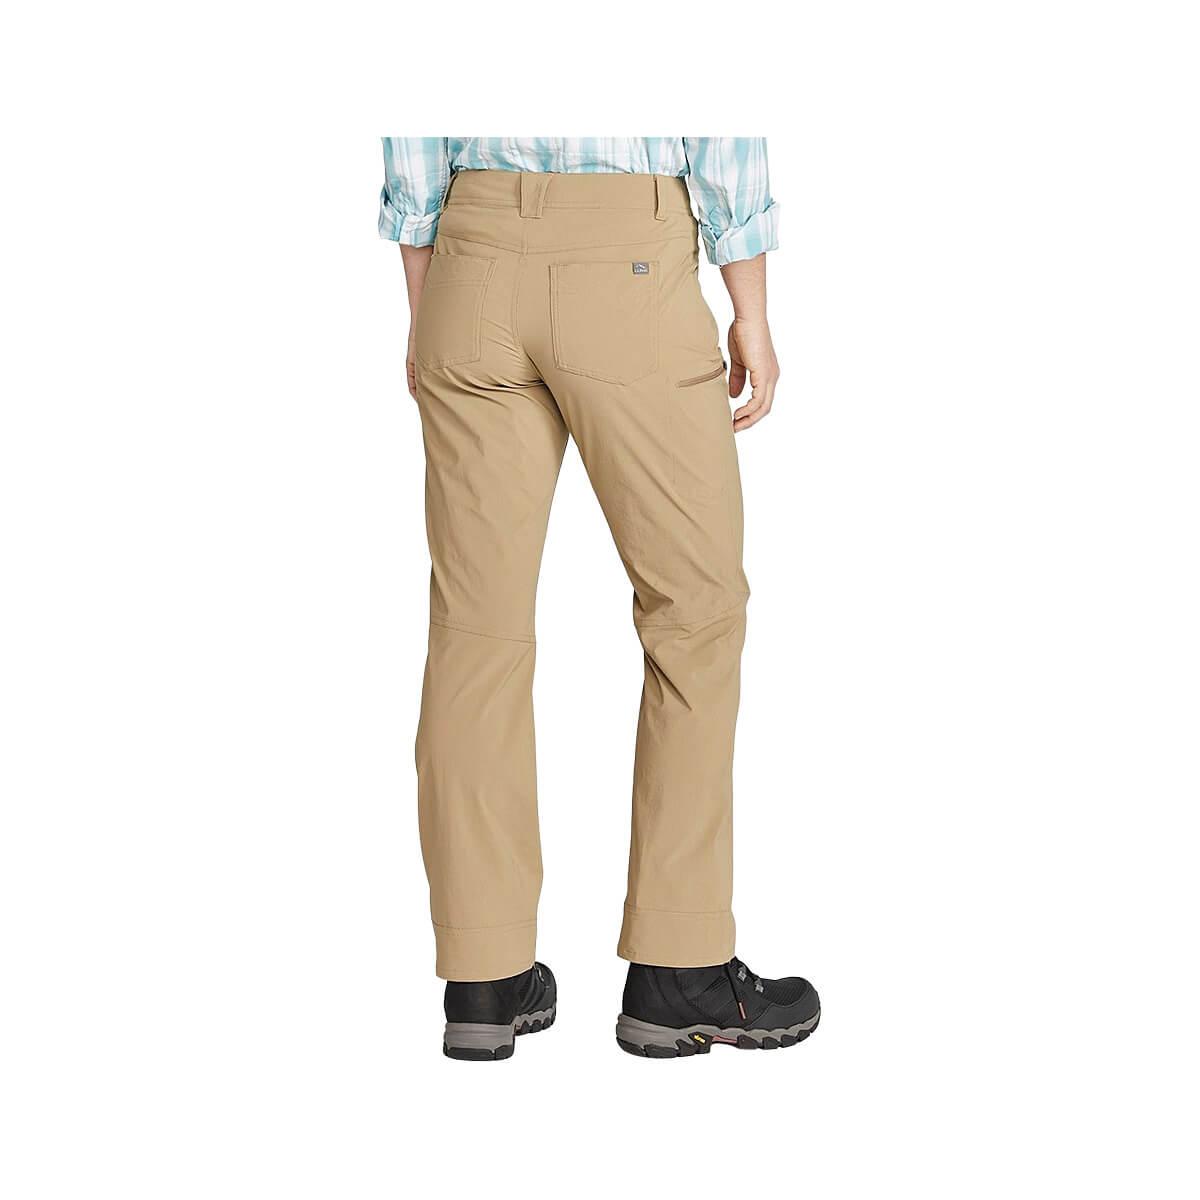 Mast General Store  Women's Rydr Pants